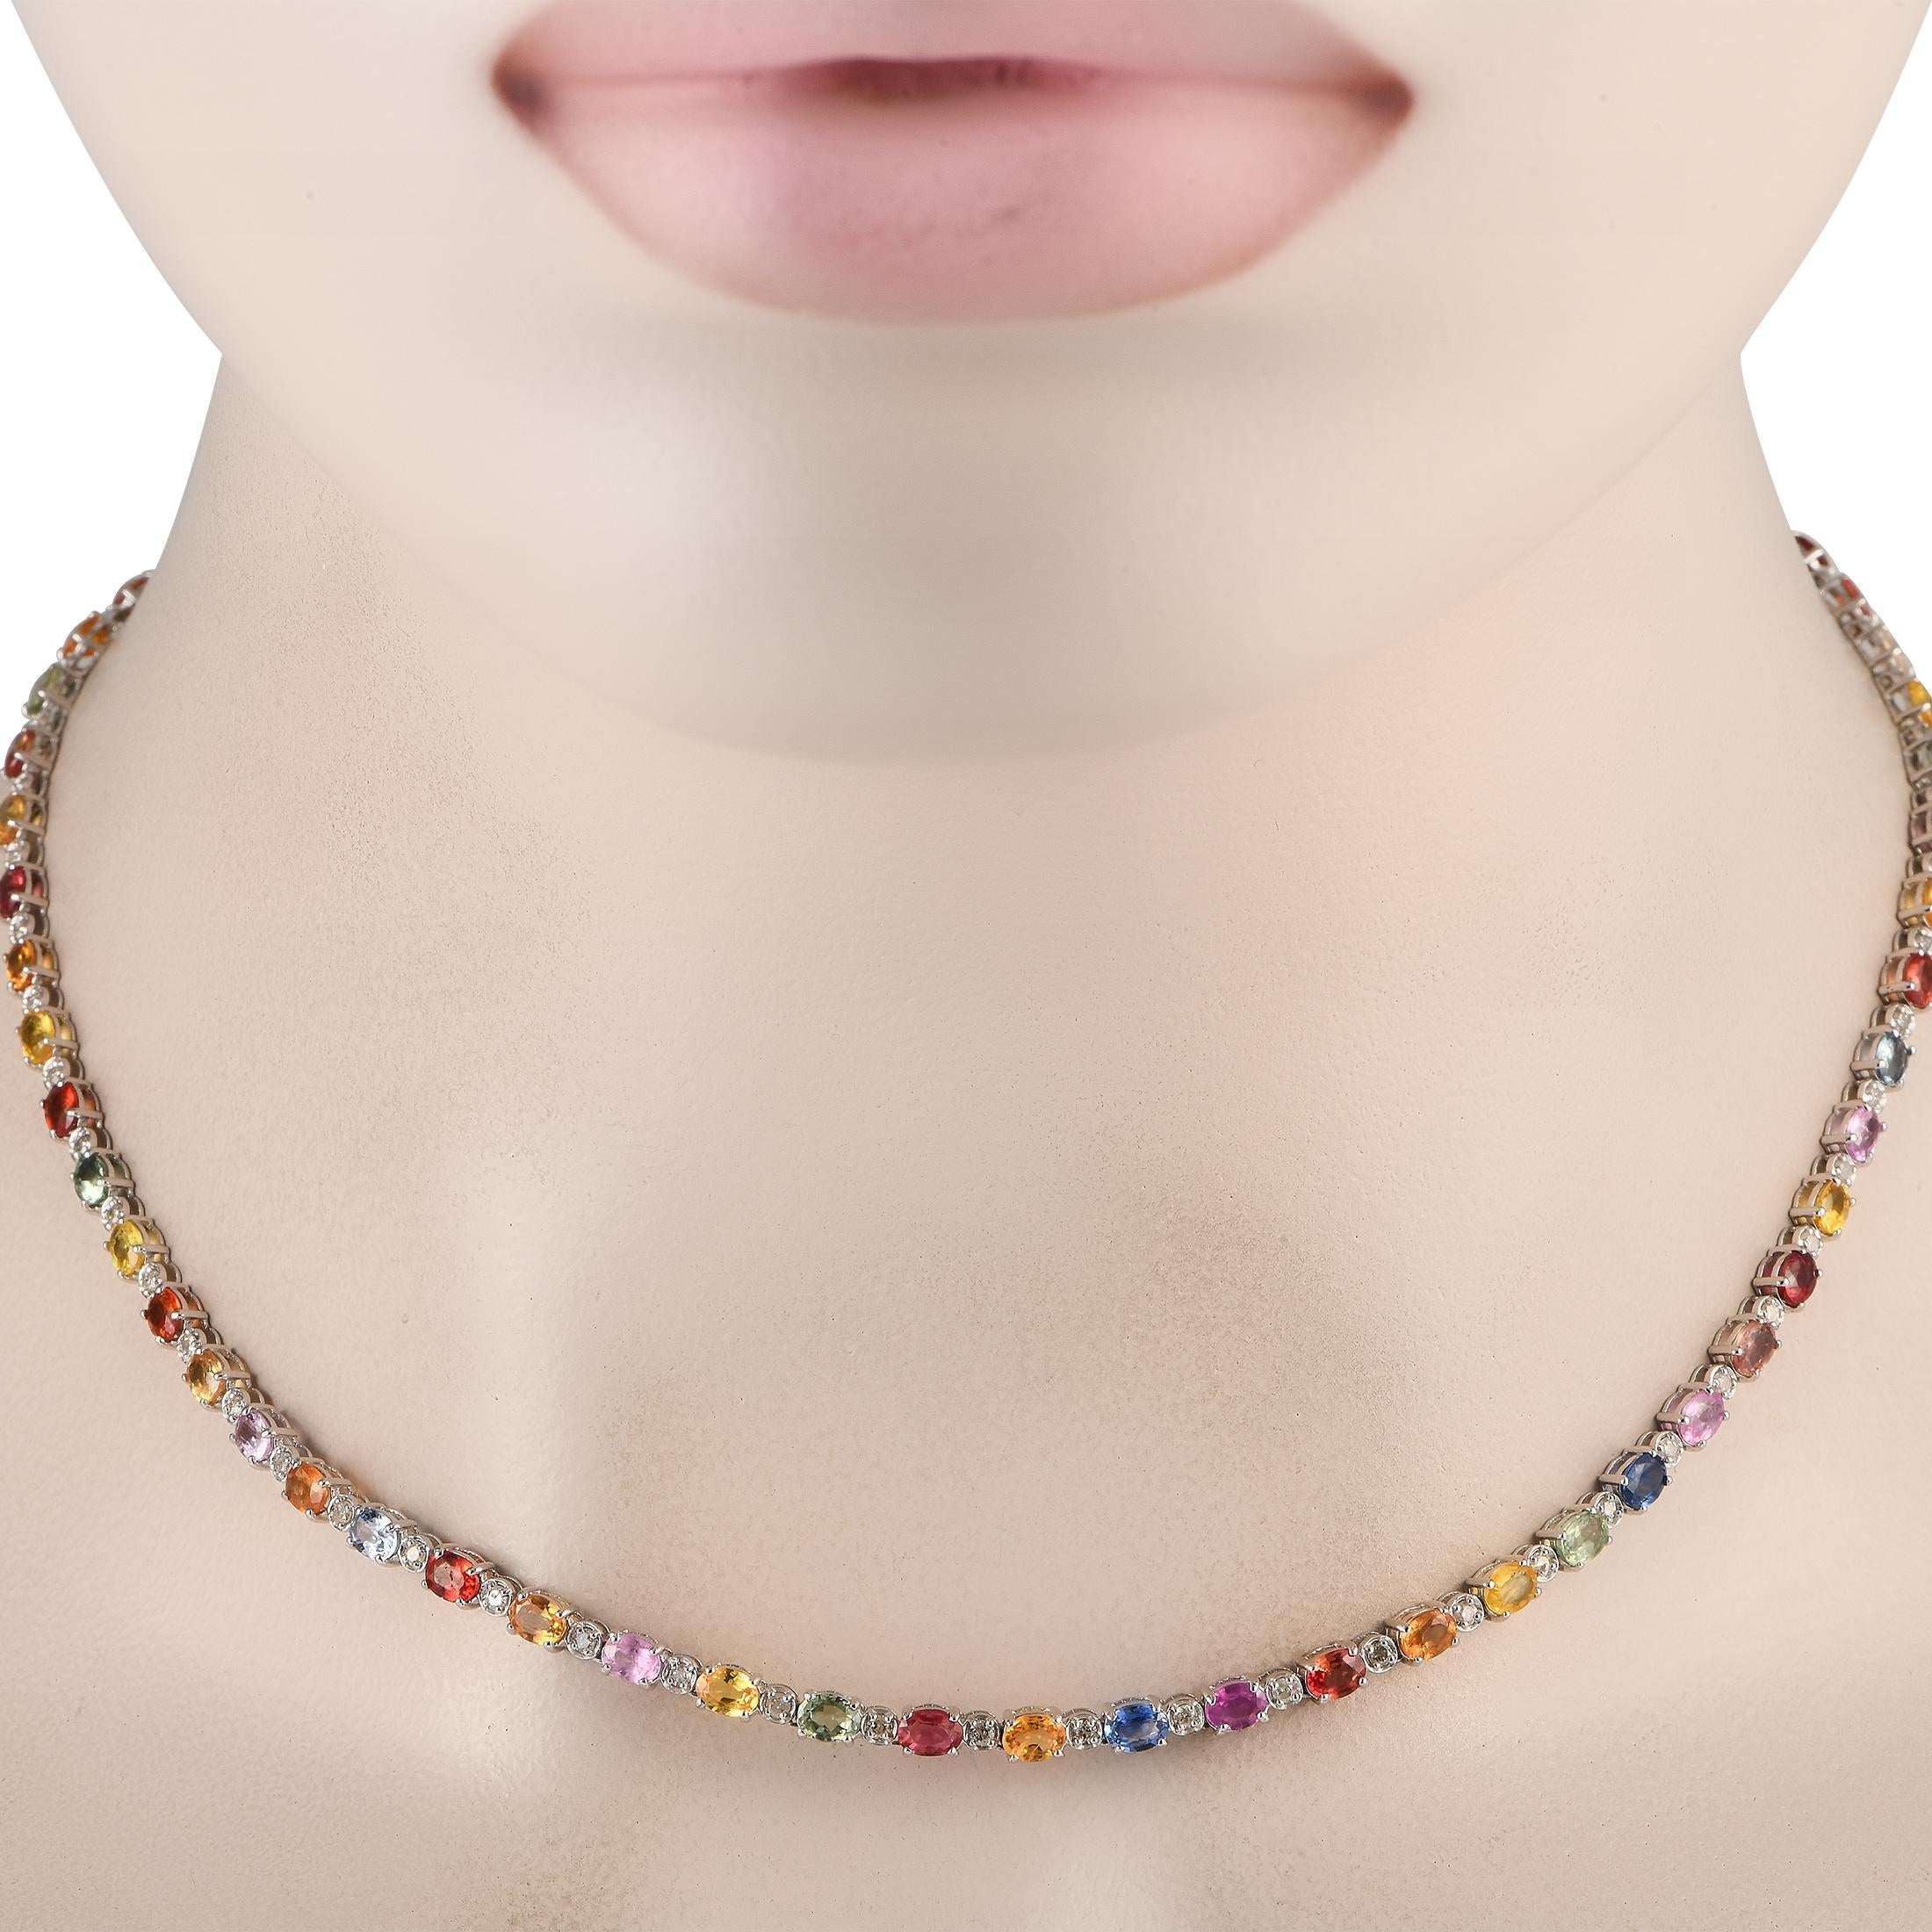 Add a pop of color by pairing this exquisite necklace with any ensemble. Elegant and incredibly sophisticated, this piece features a simple 18K White Gold setting measuring 16.5 long. A series of multicolored Sapphires totaling 14.16 carats are